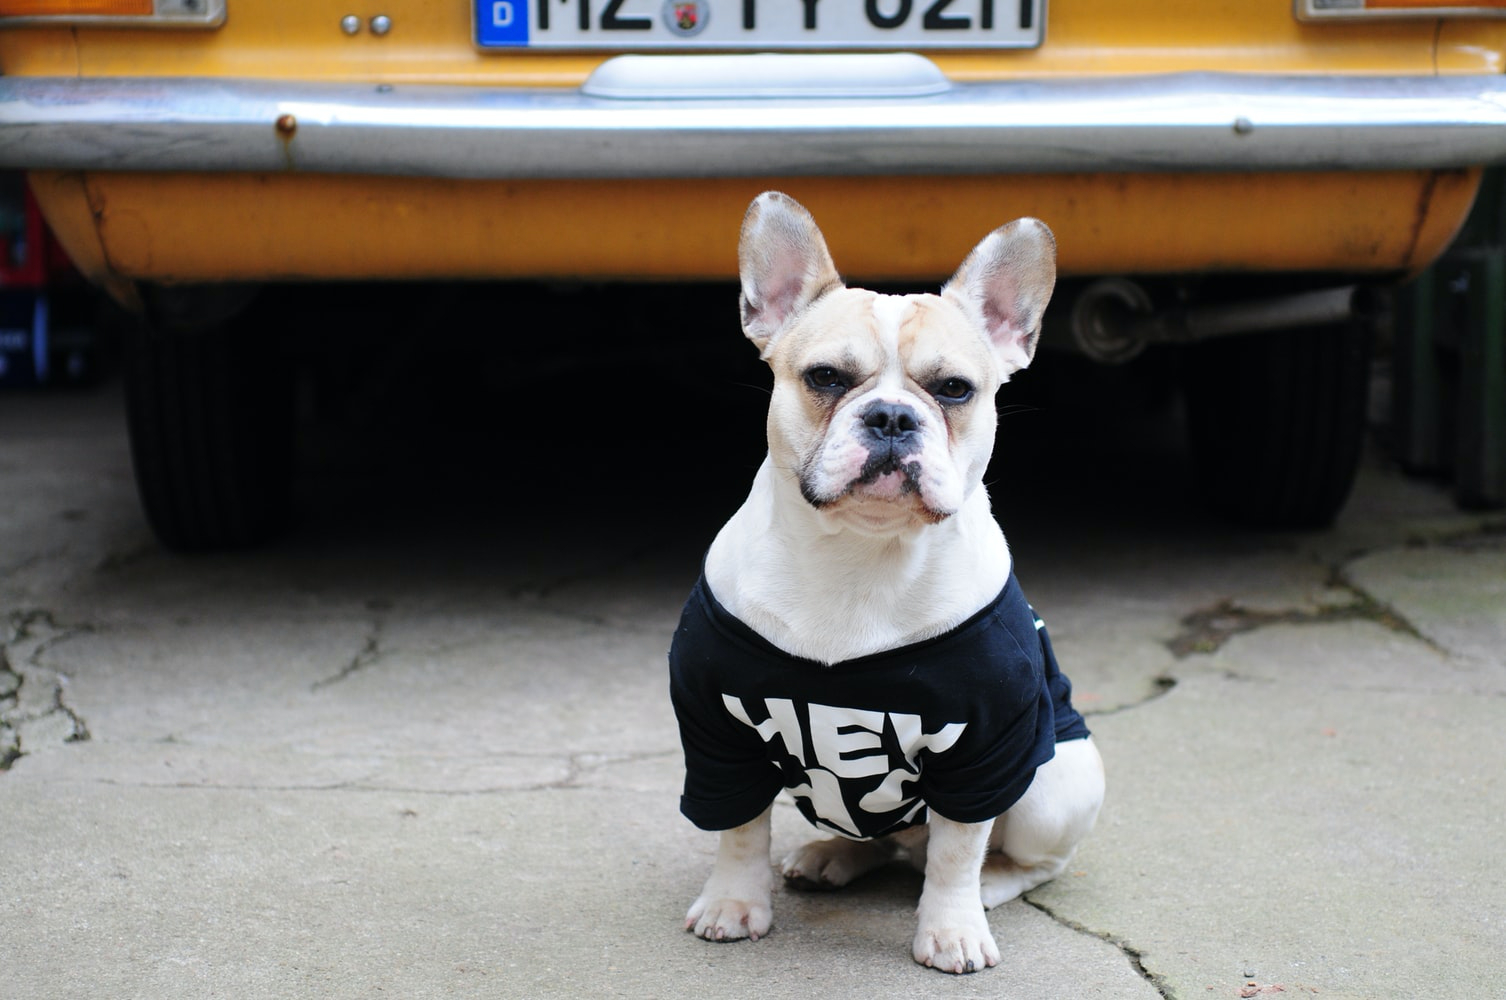 A French Bulldog wearing a black shirt while sitting on the pavement behind the car